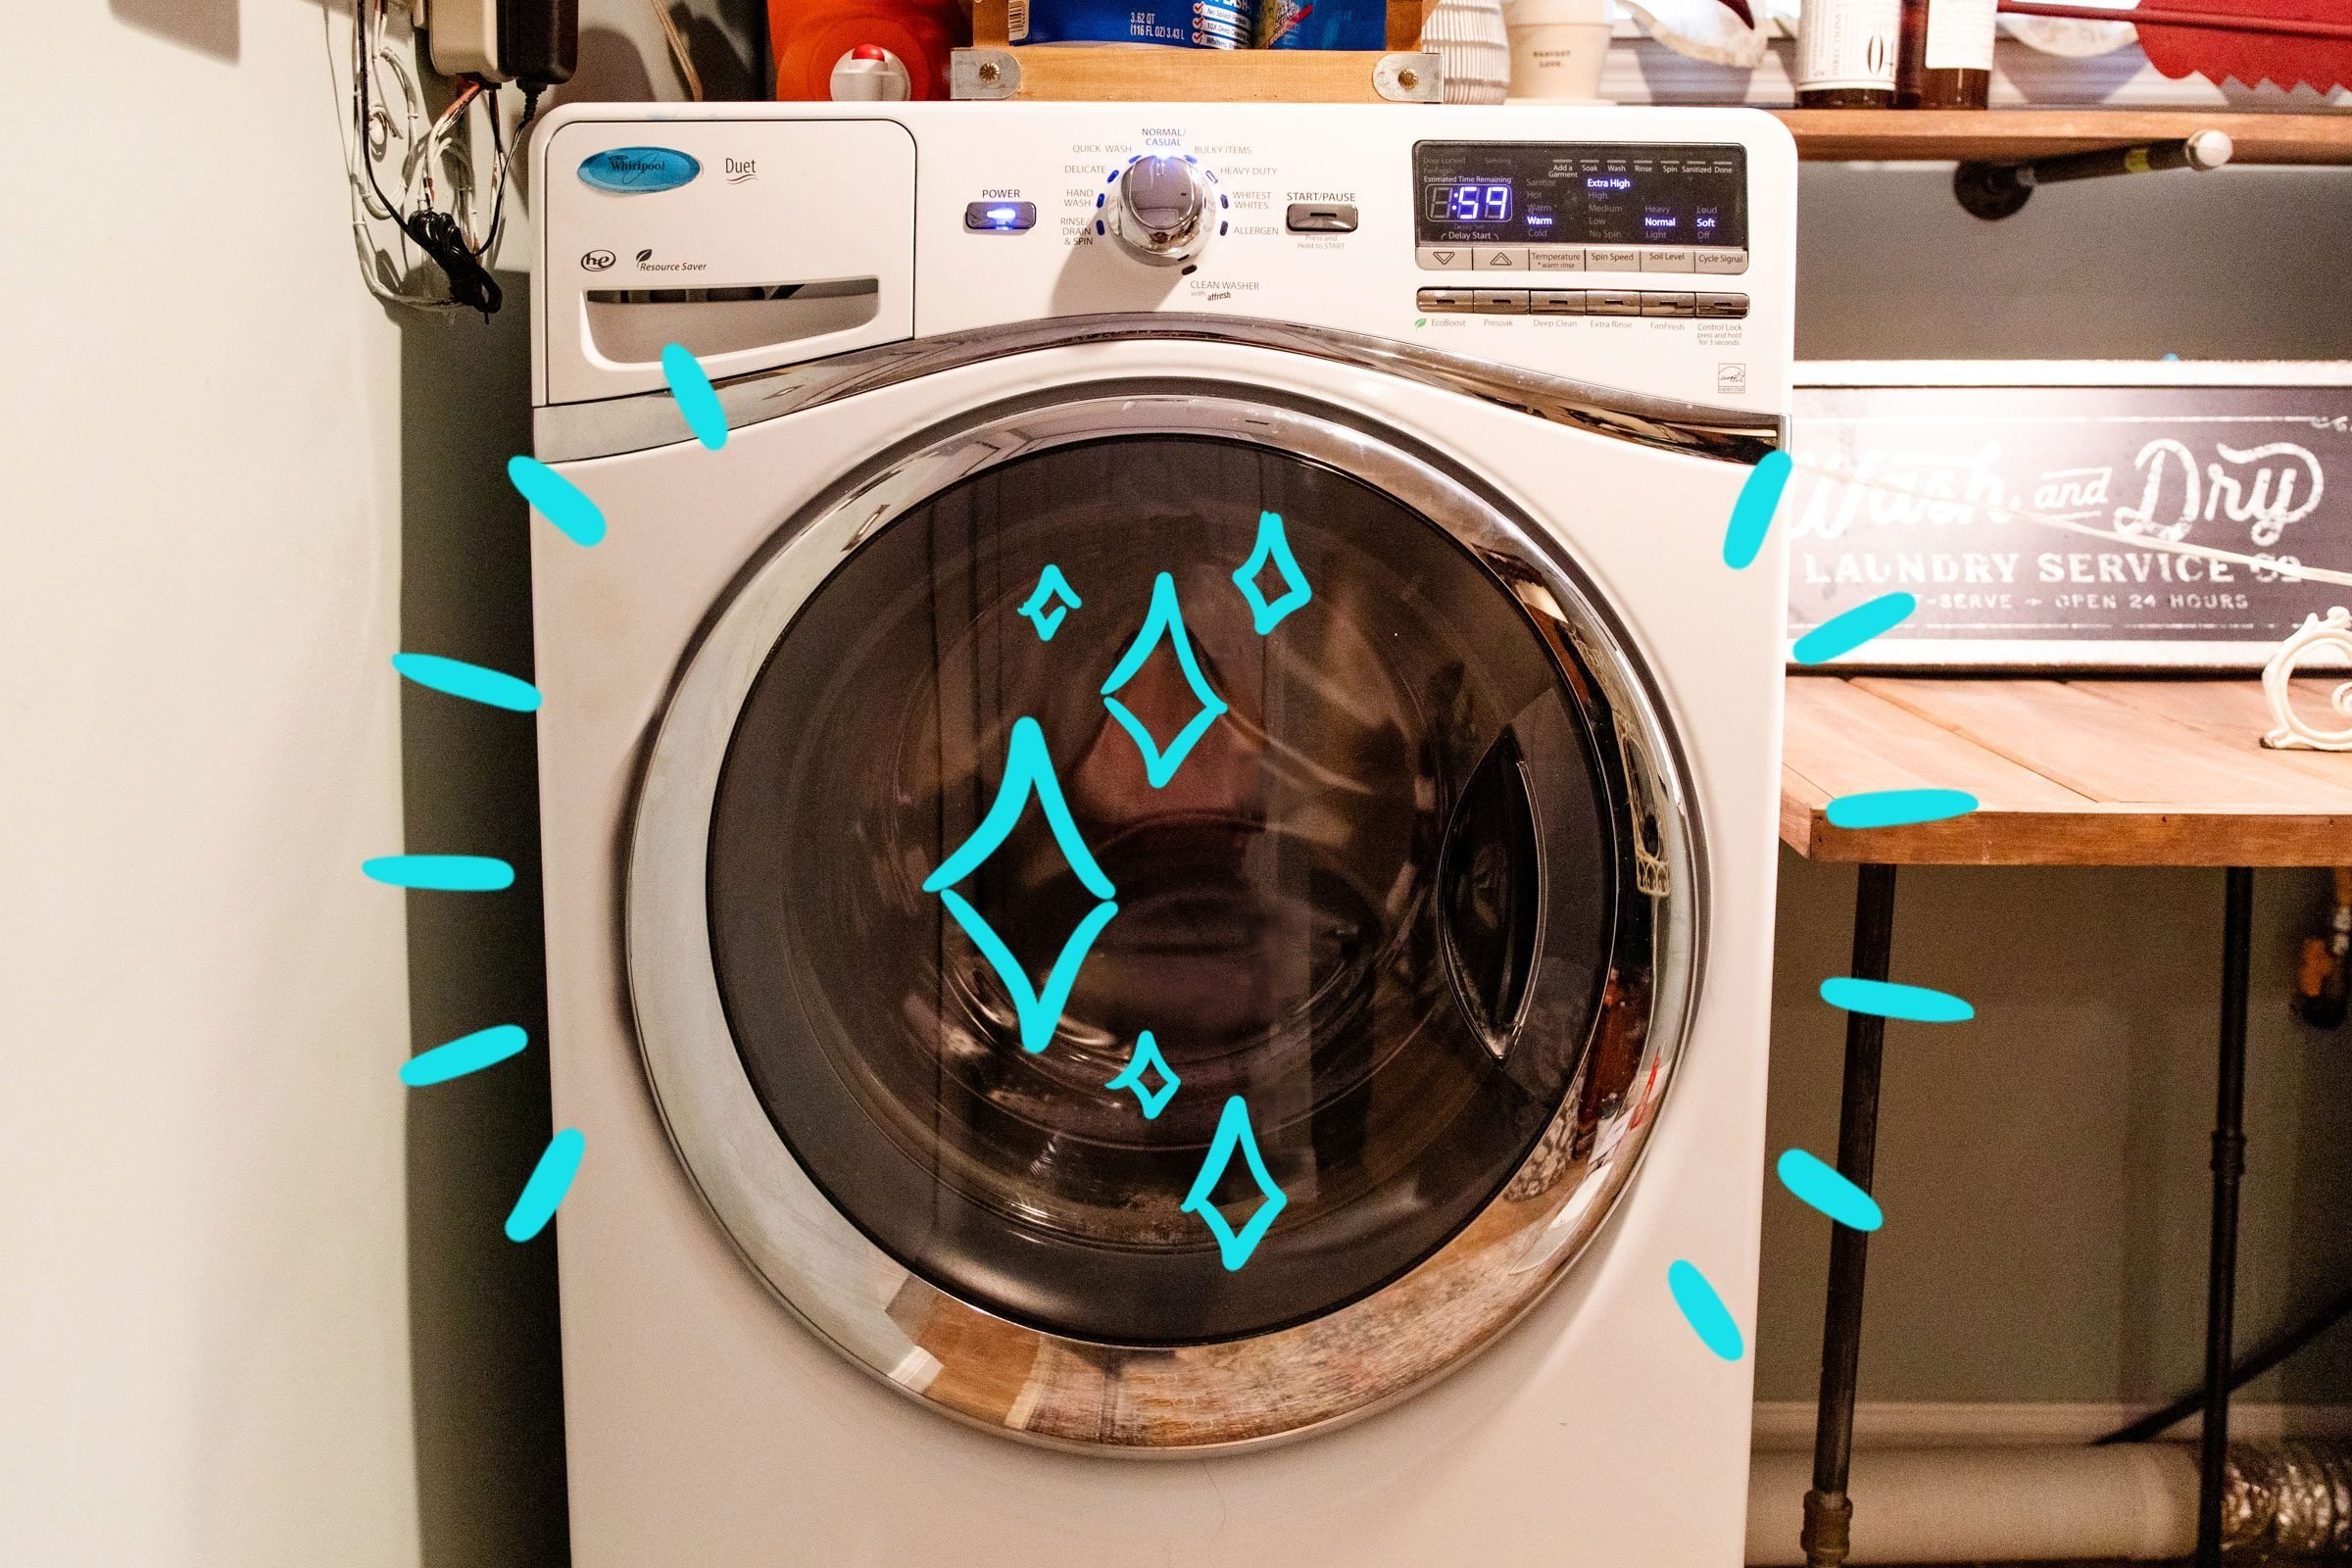 A washing machine door with sparkles, emanating wiggly lines to symbolize cleanliness